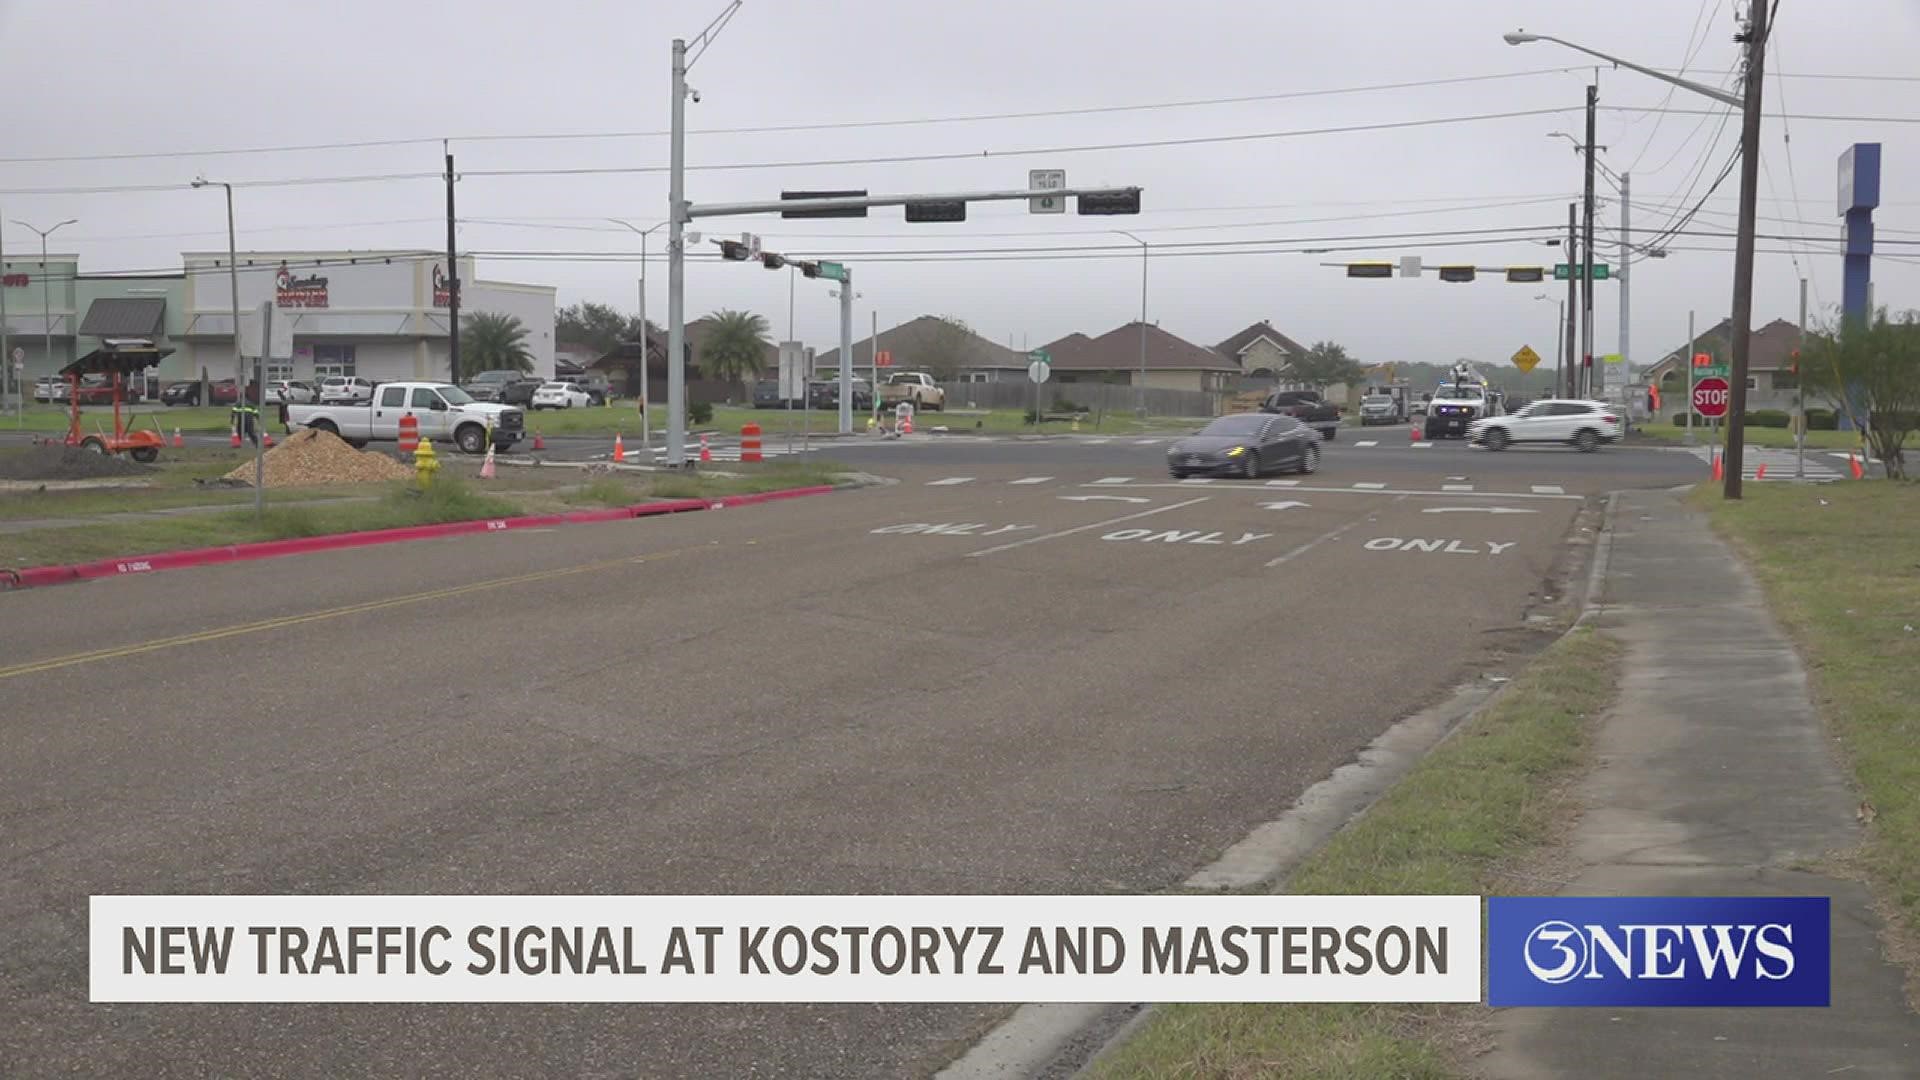 Additional safety precautions and improvements will also be added, including the ability for drivers going northbound on Kostoryz to make U-turns at the intersection